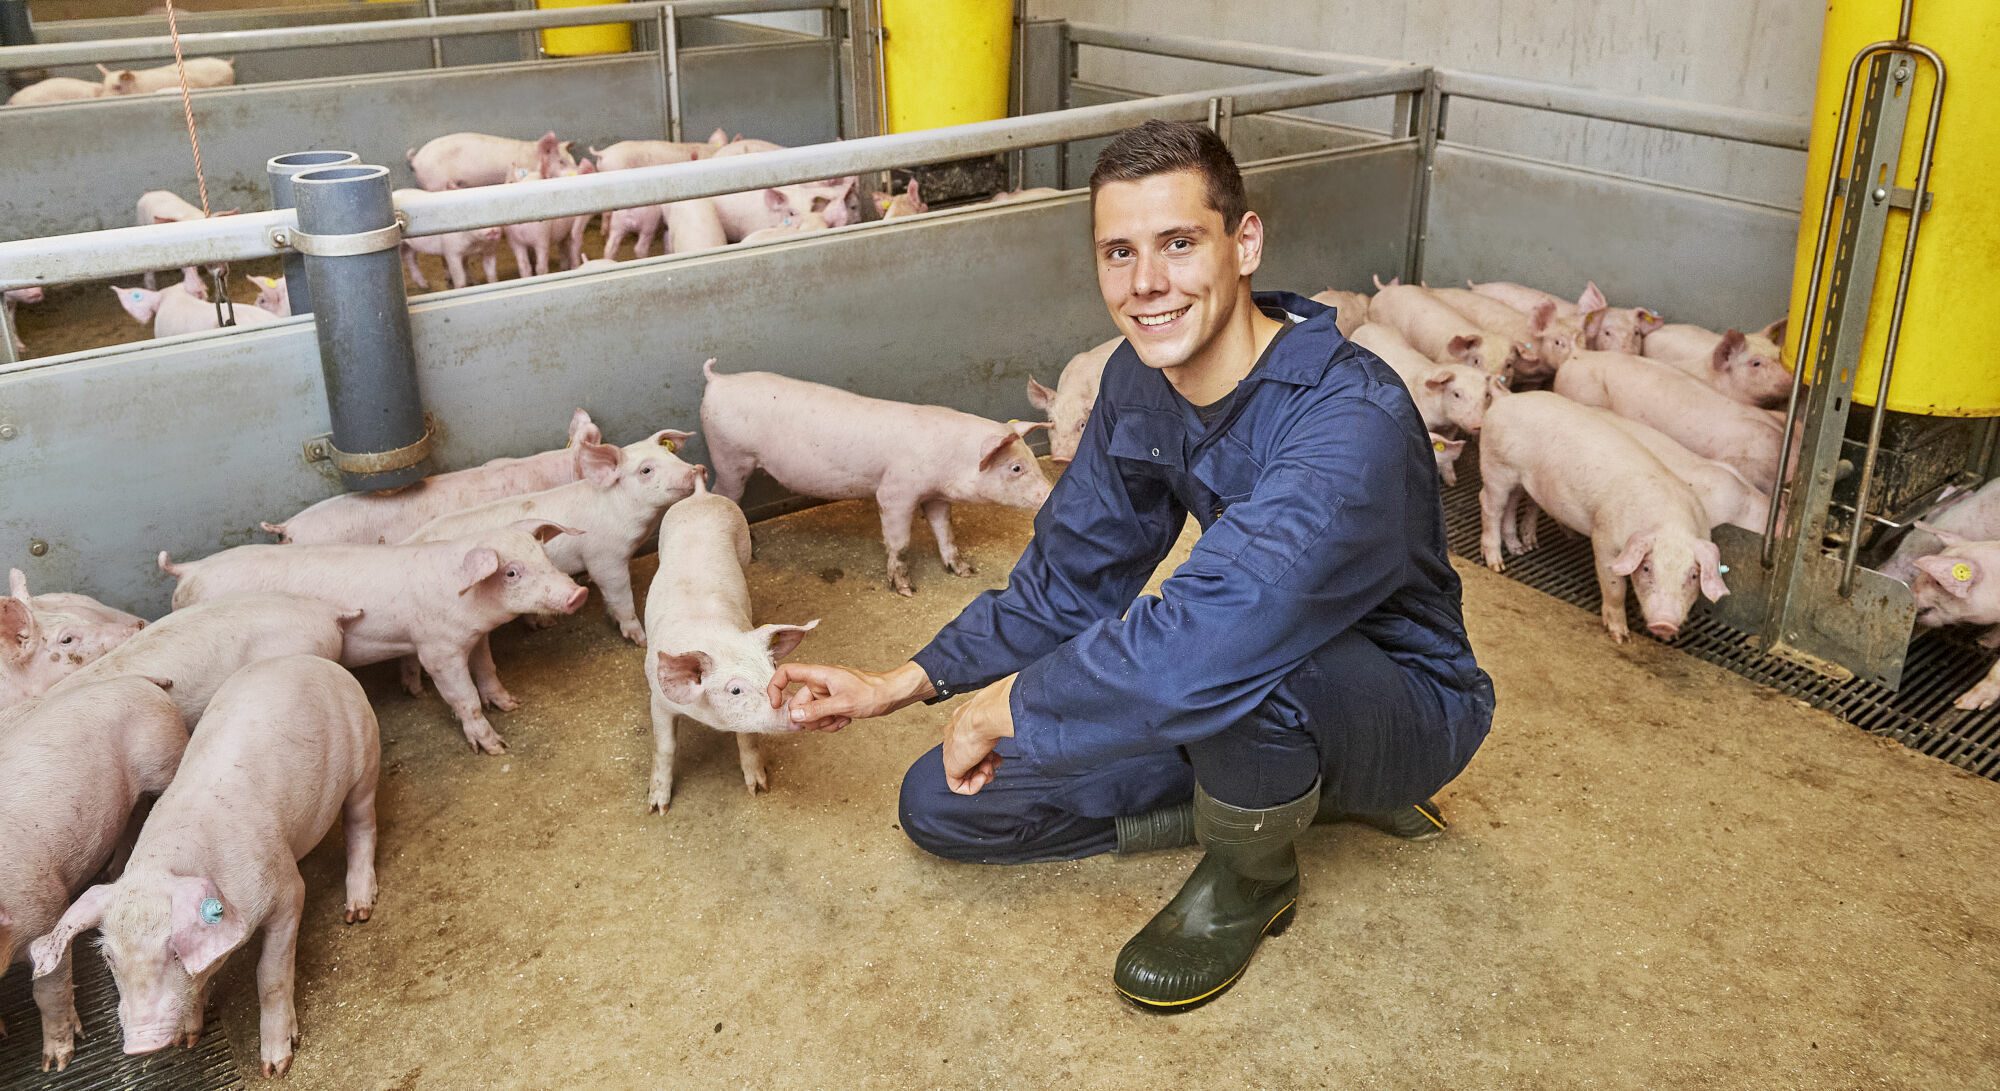 Partnership with pig farmers